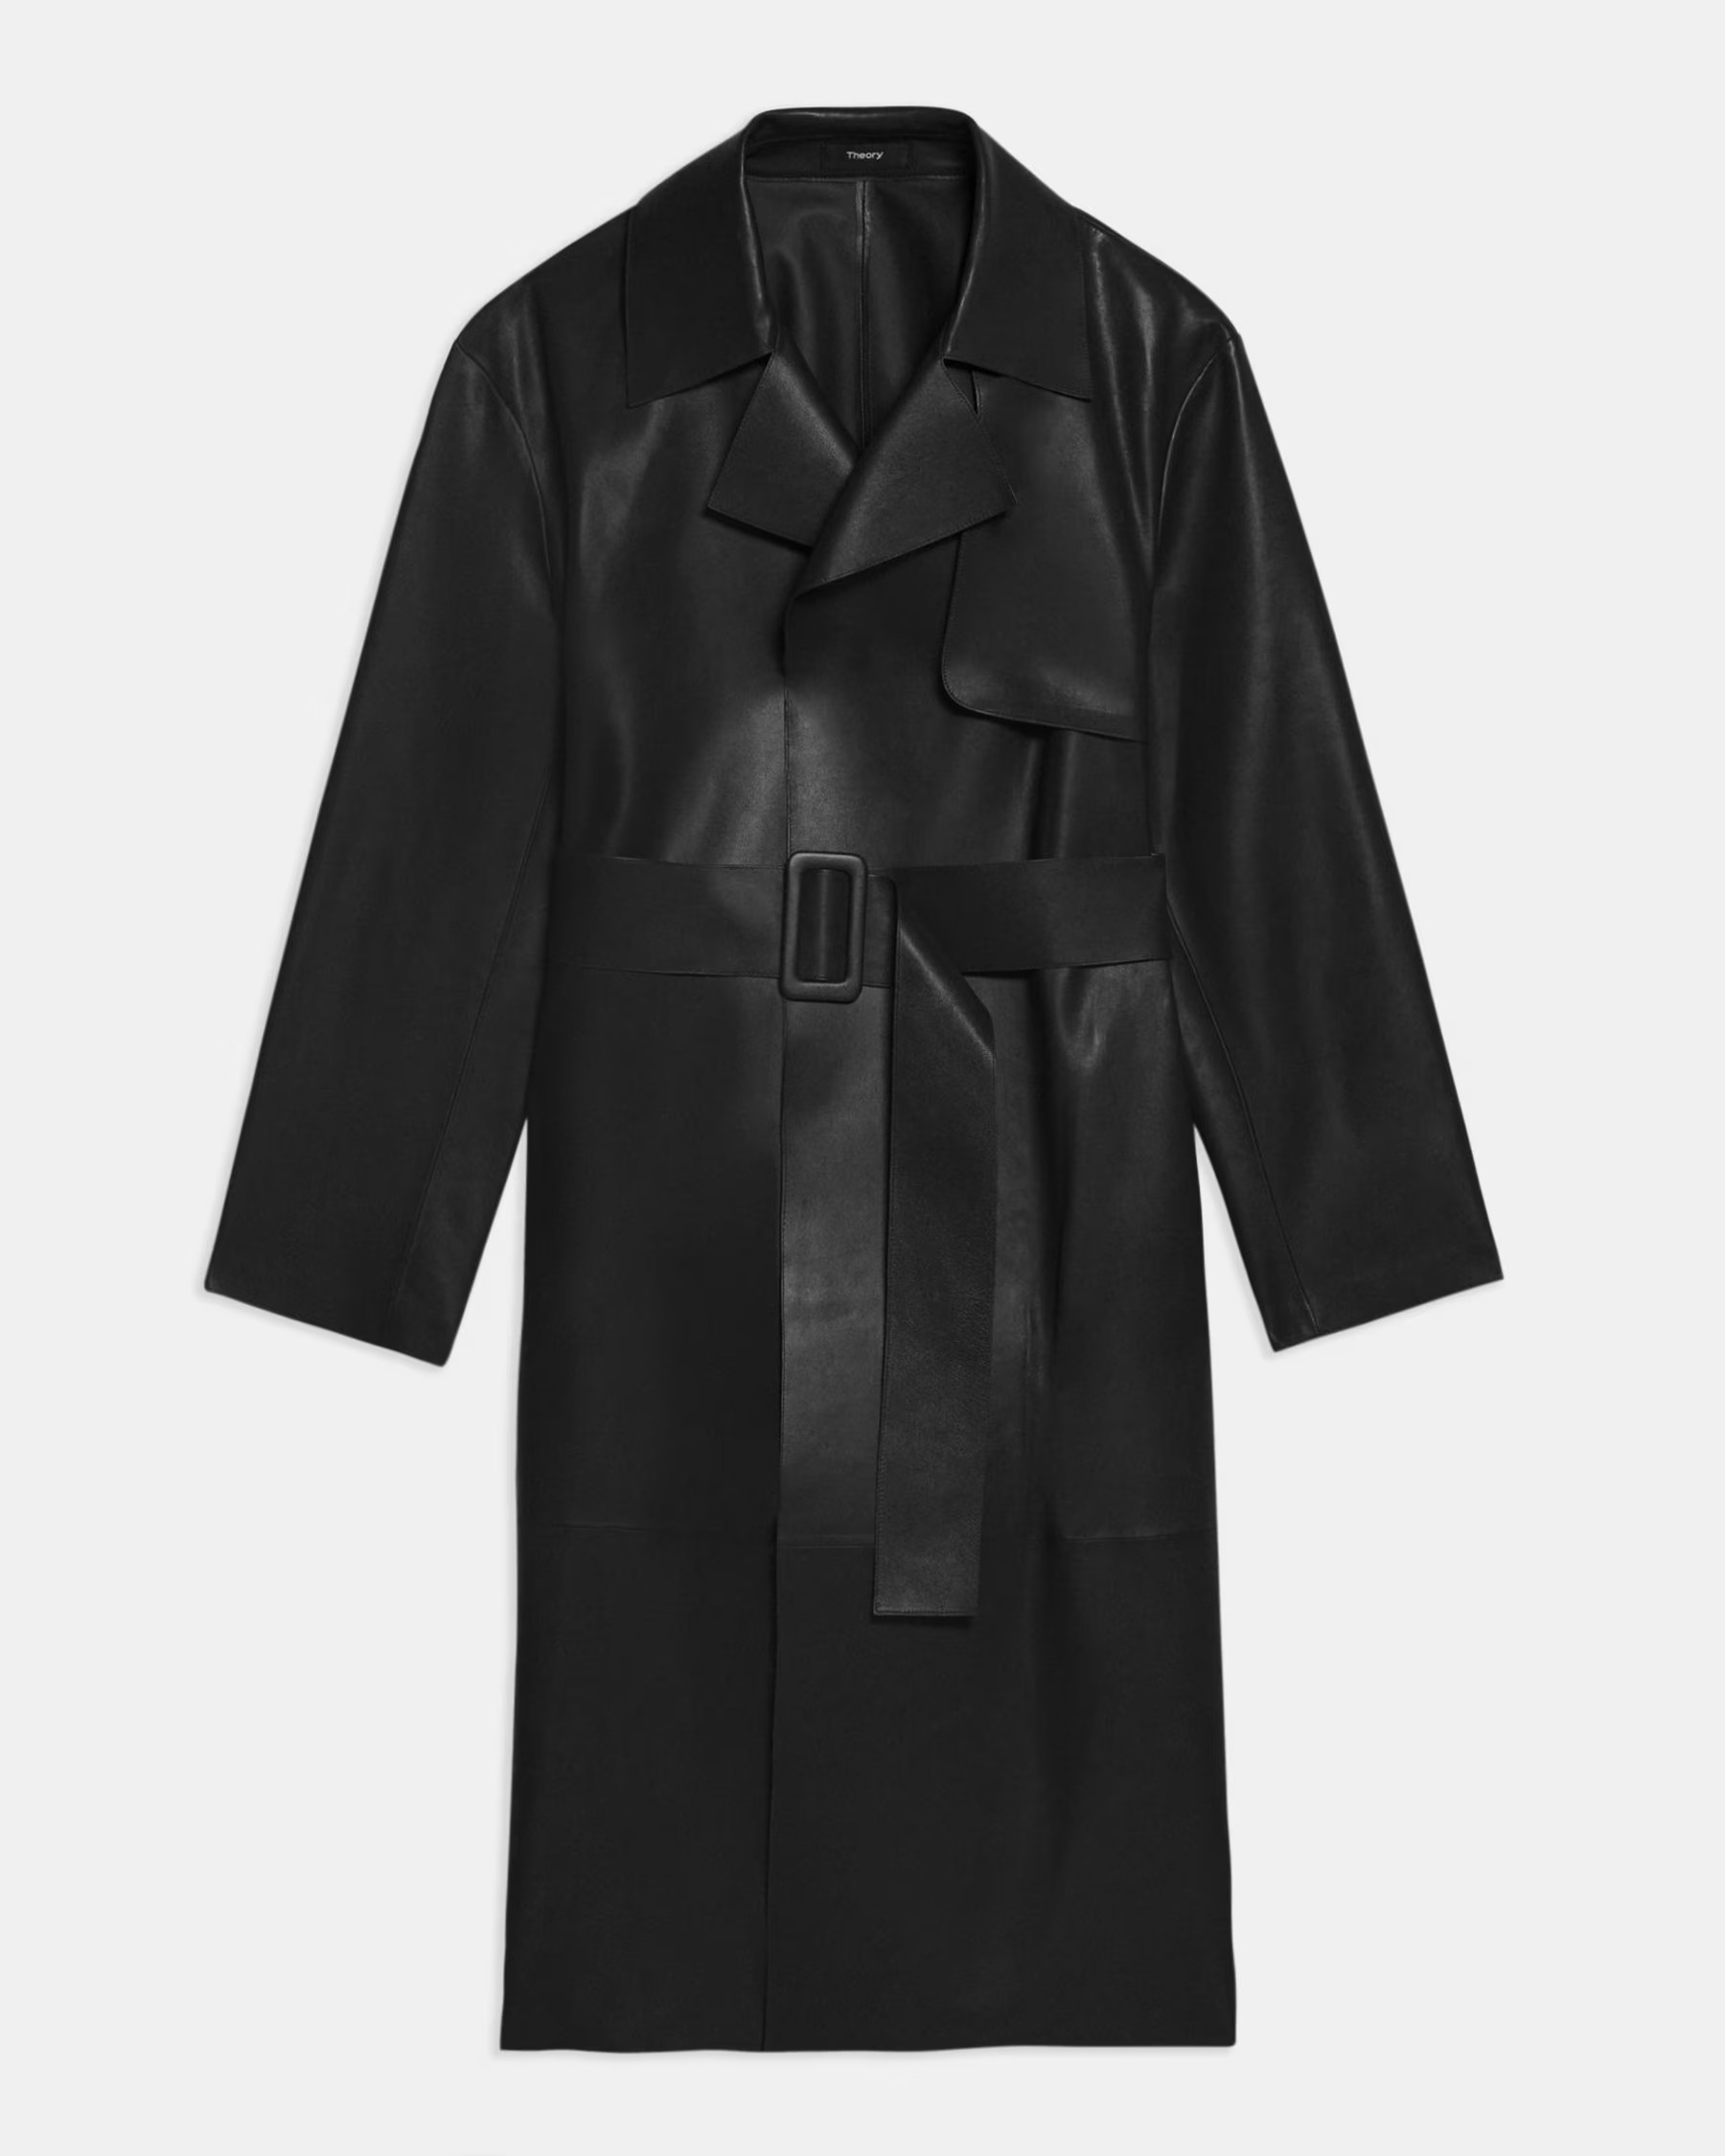 Alexa Chung Just Wore a Black Leather Trench Coat | Who What Wear UK